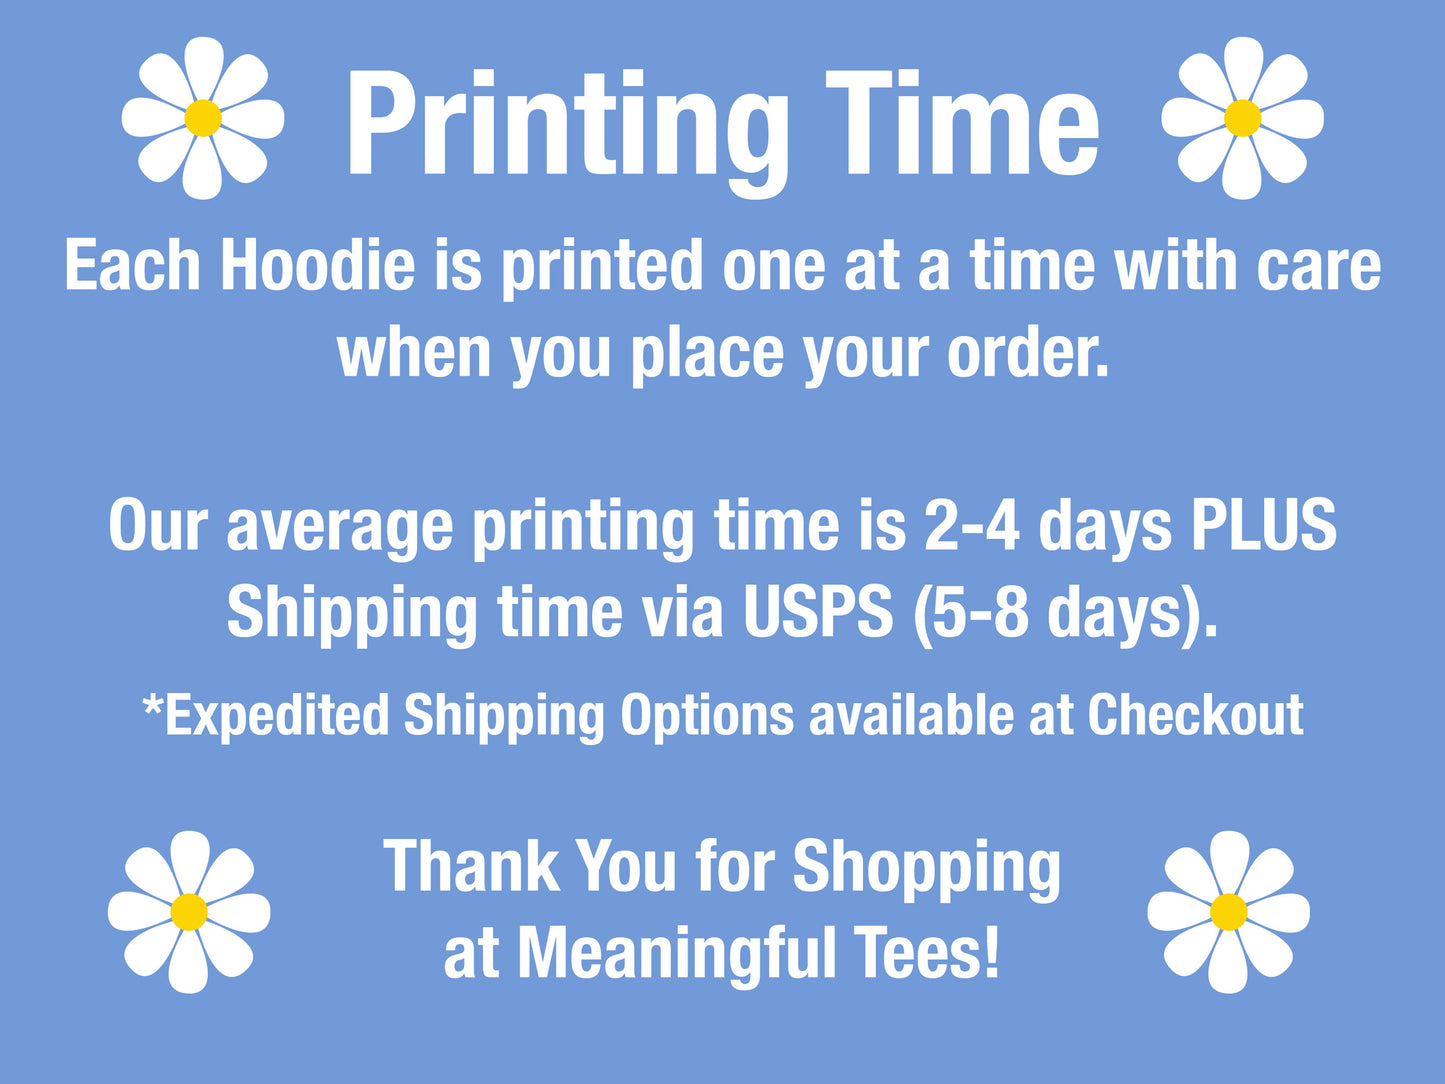 Have A Good Day Hoodie - DOUBLE SIDED - New!